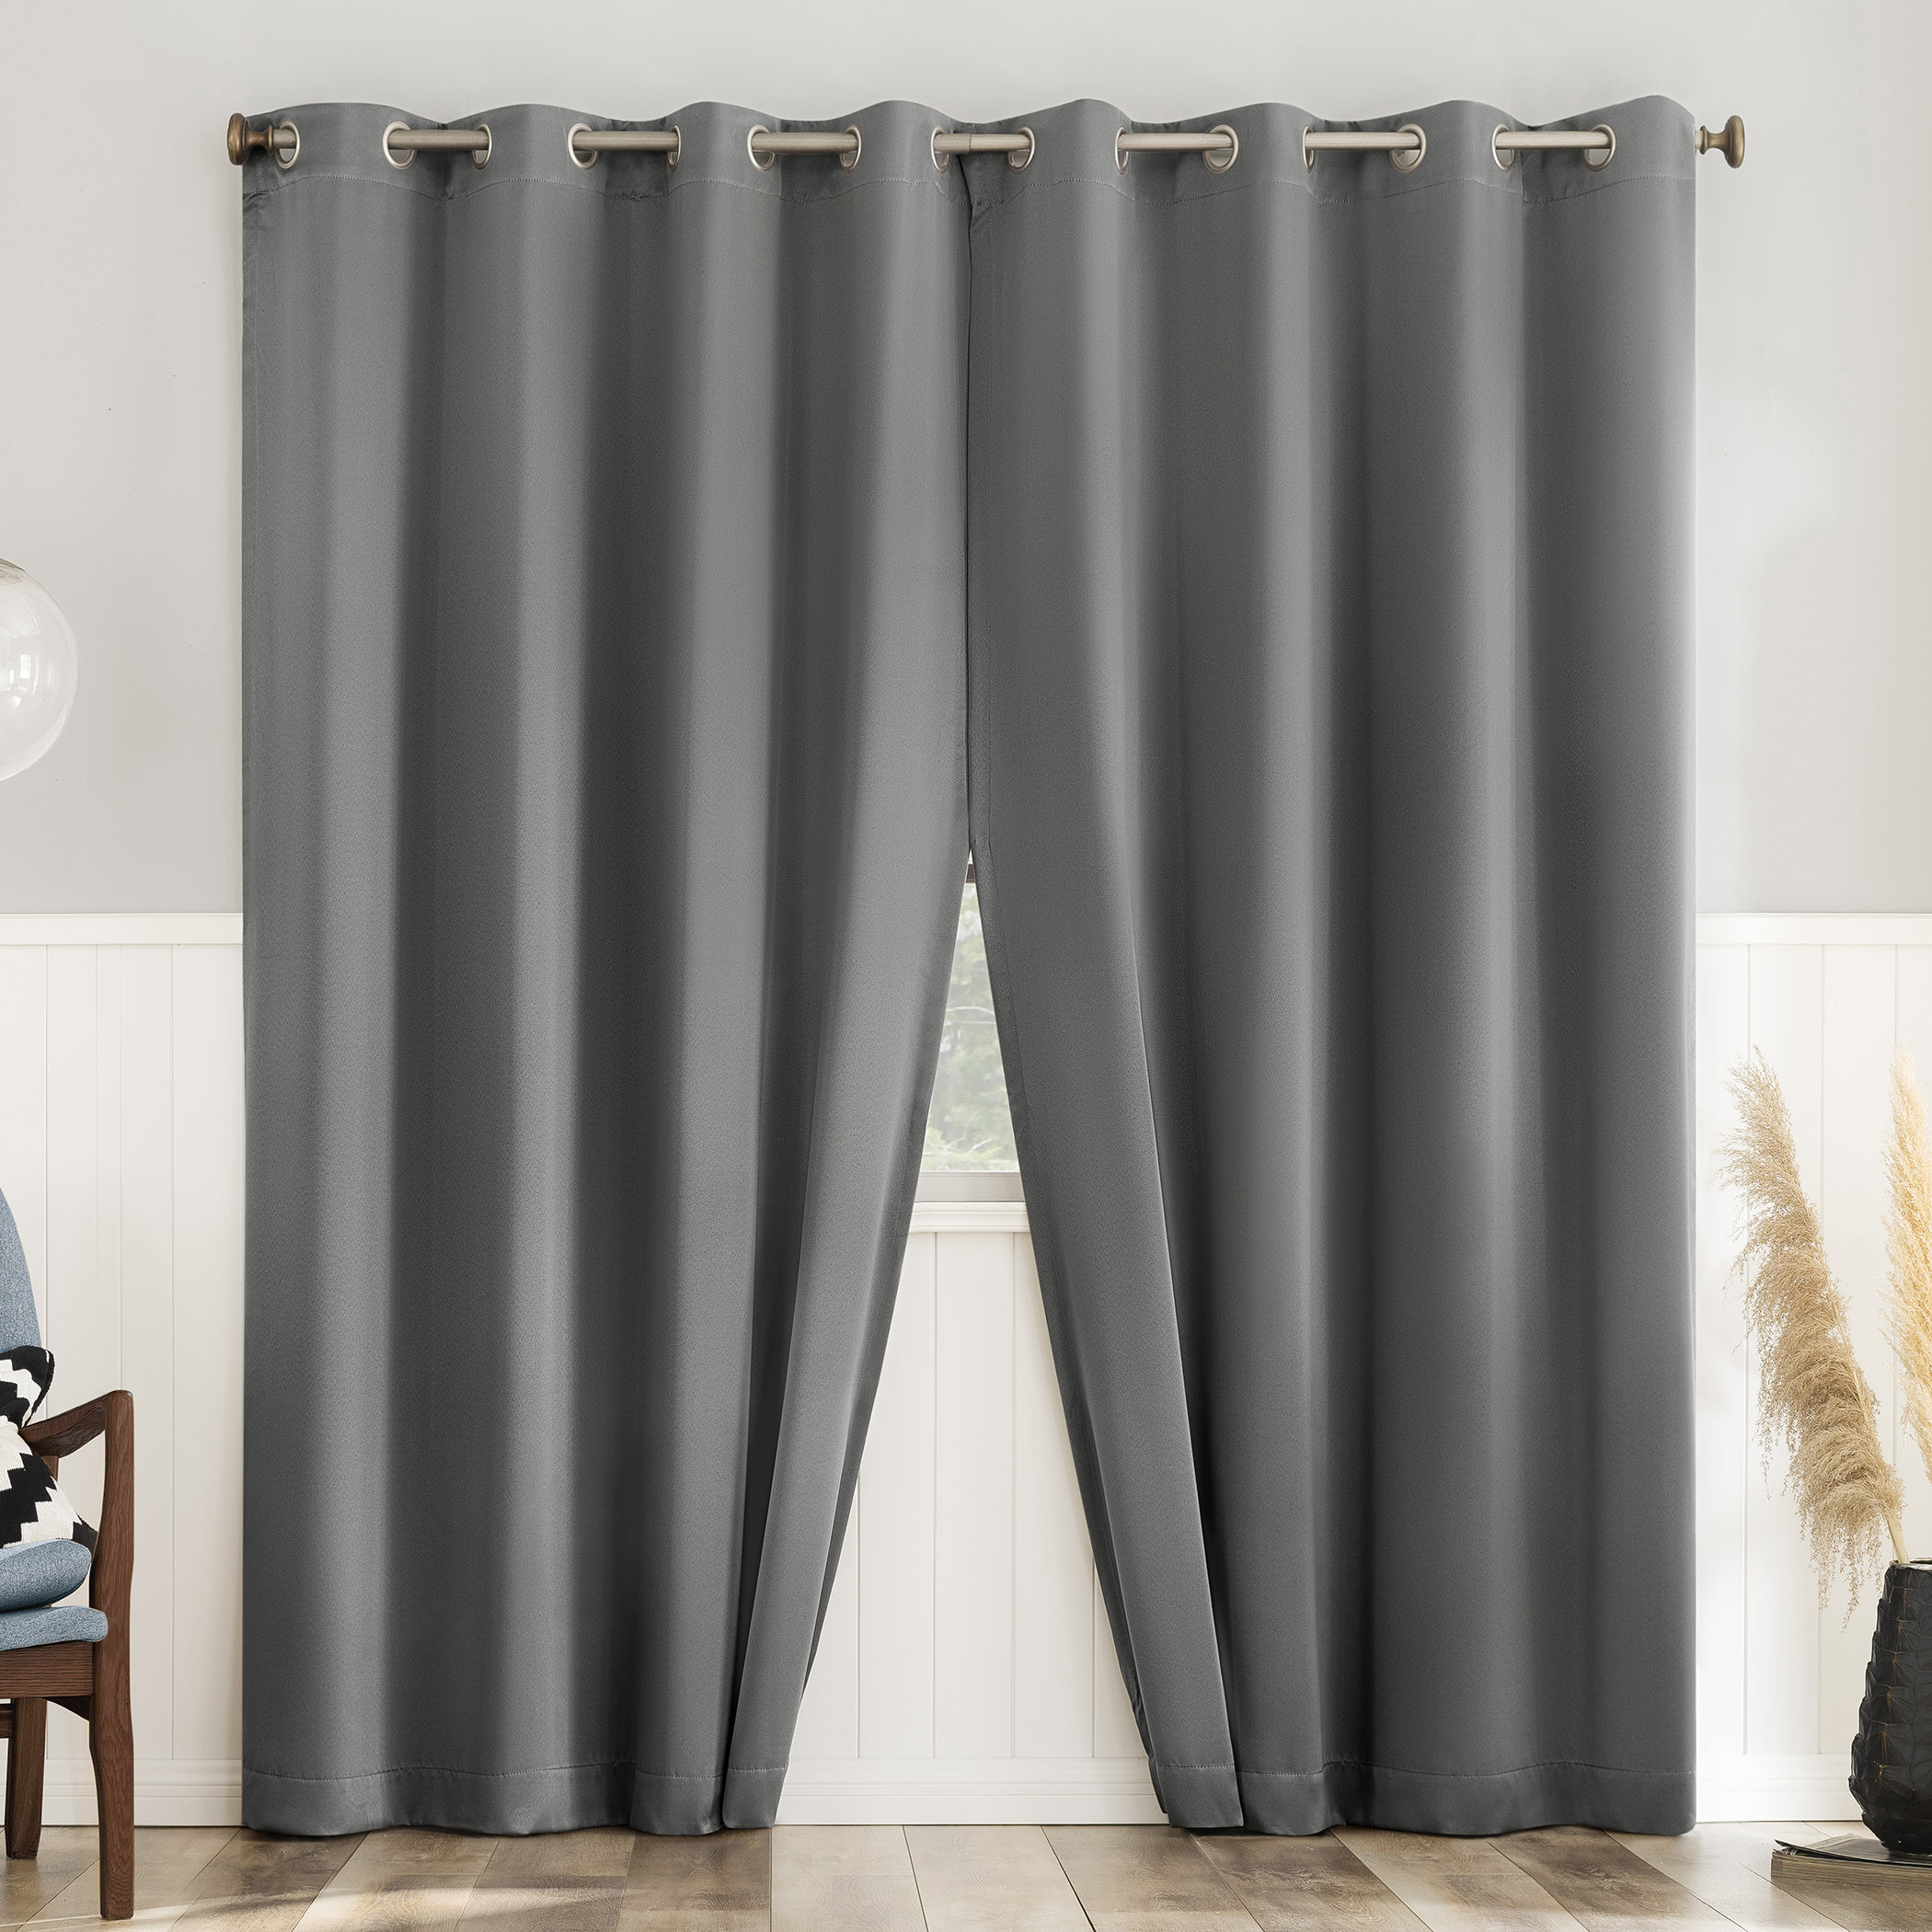 How to Hang Grommet Curtains